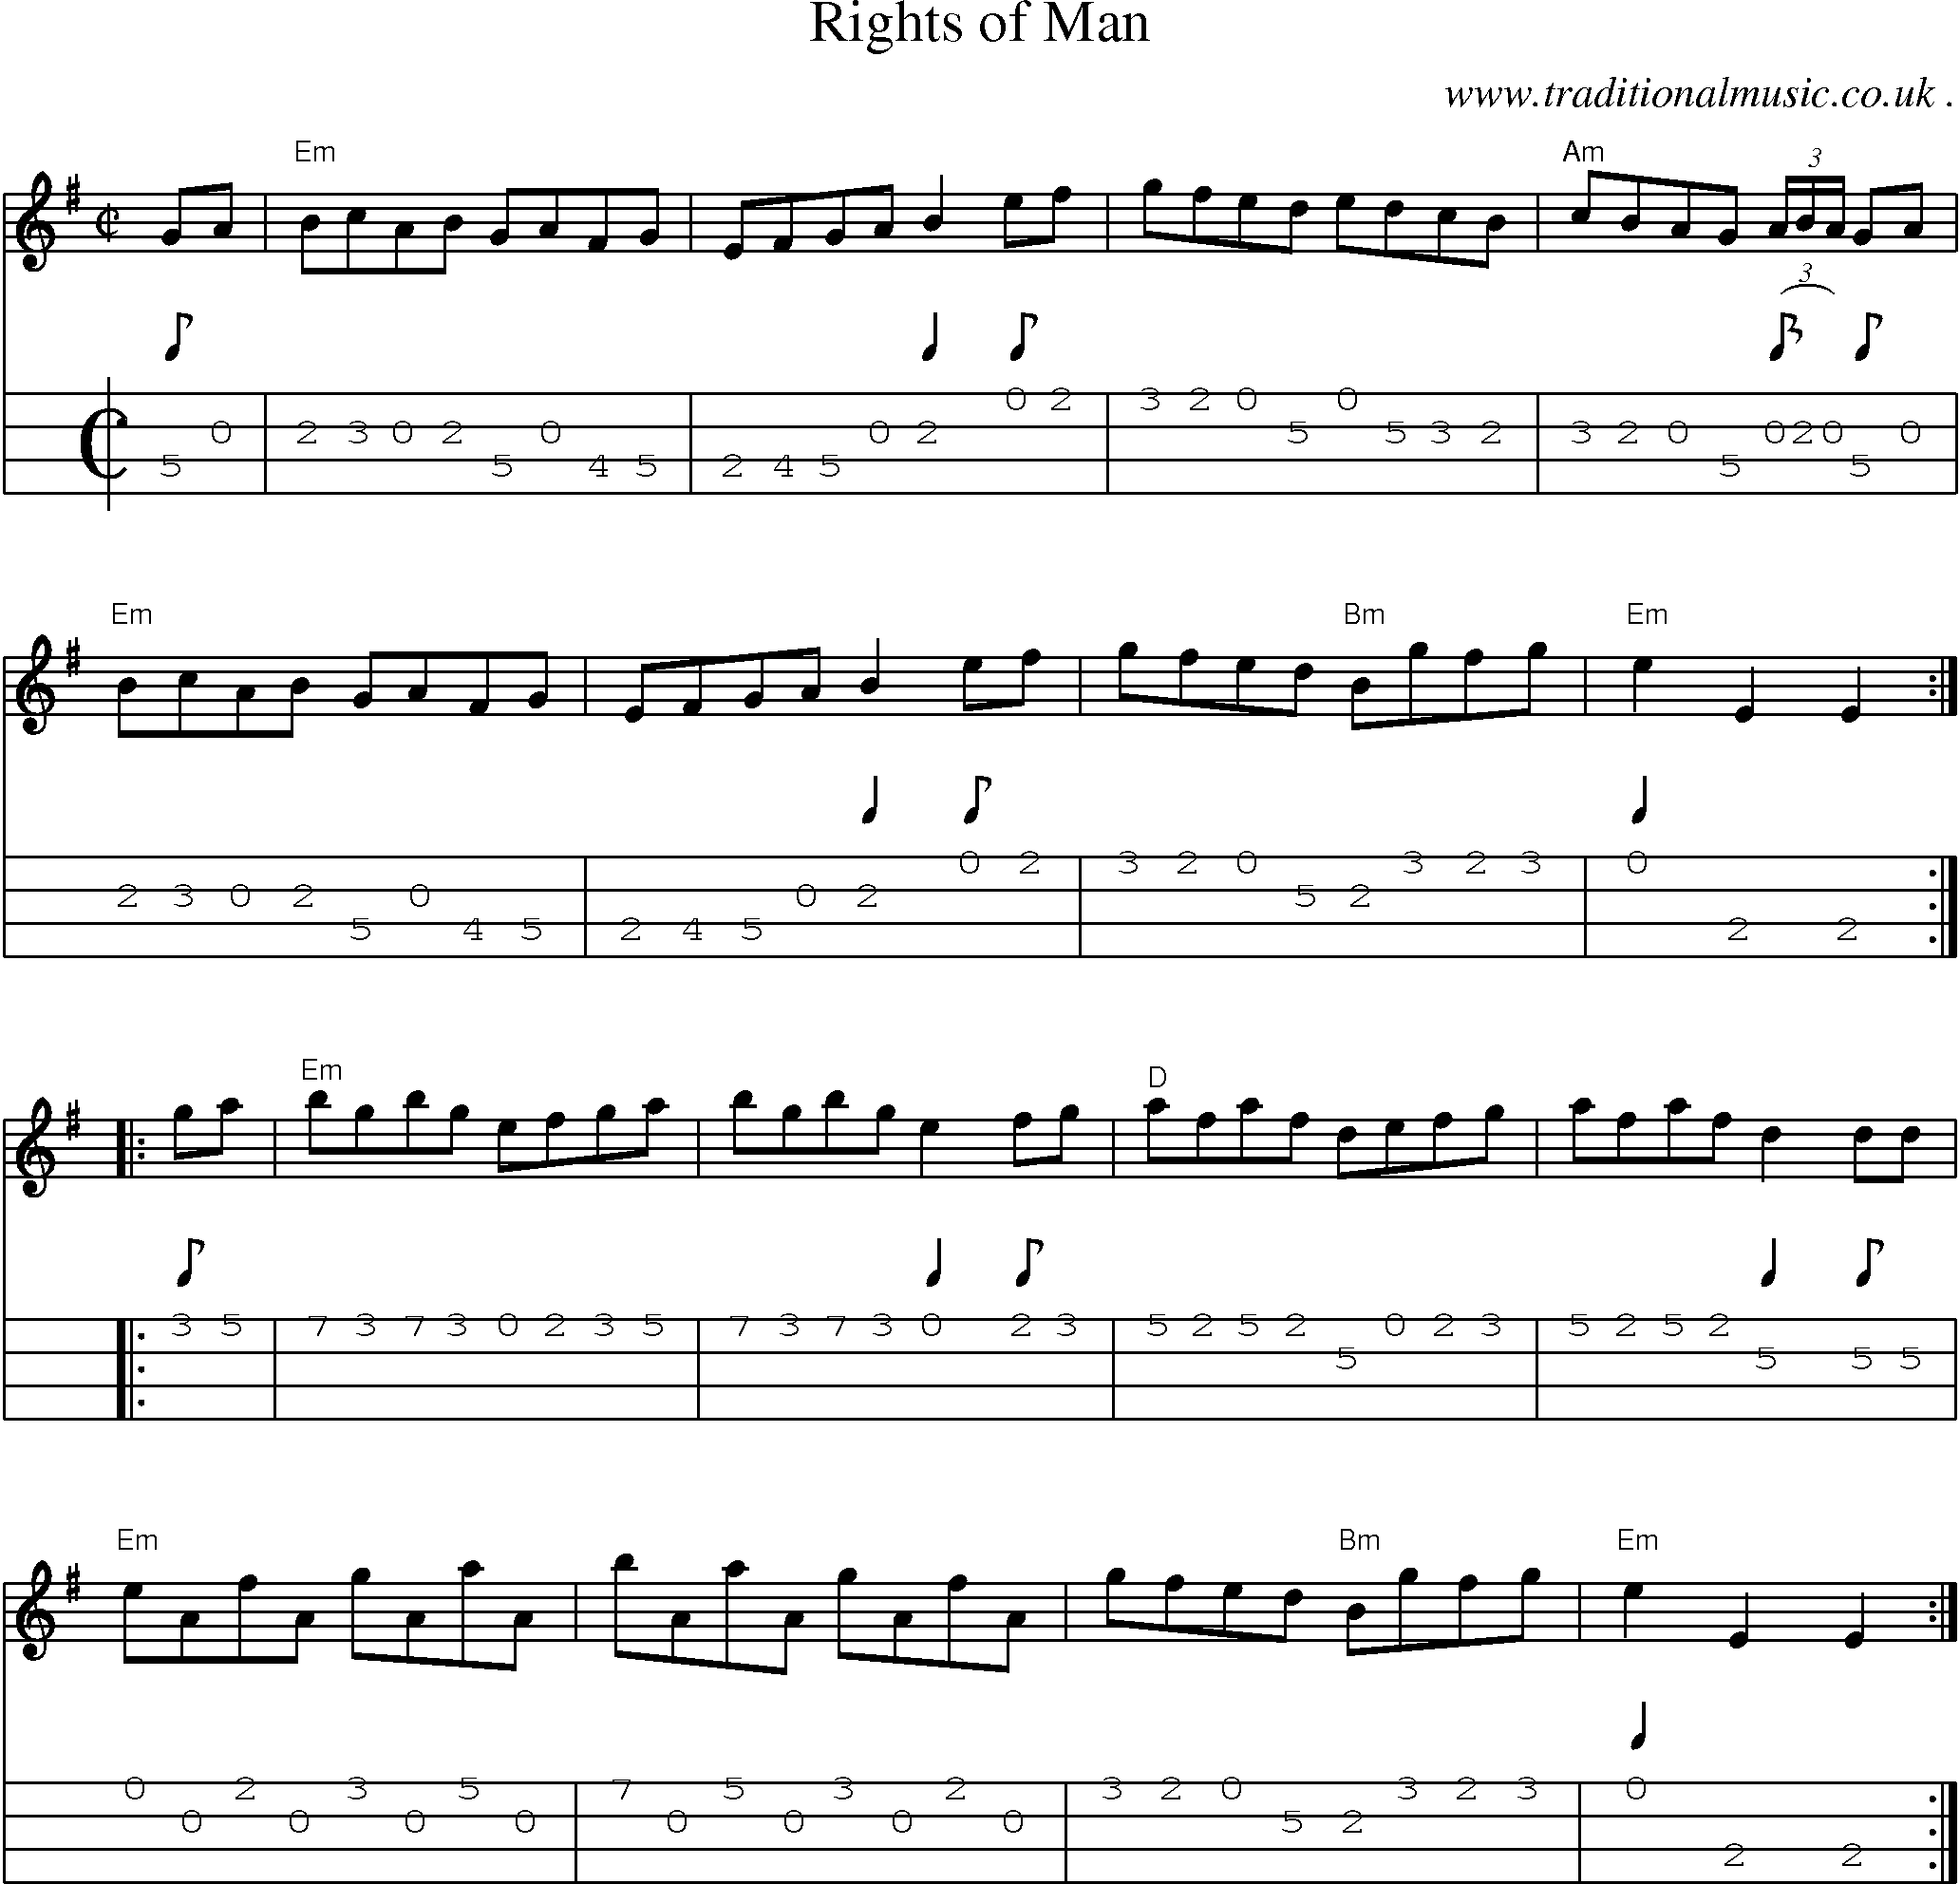 Music Score and Guitar Tabs for Rights Of Man